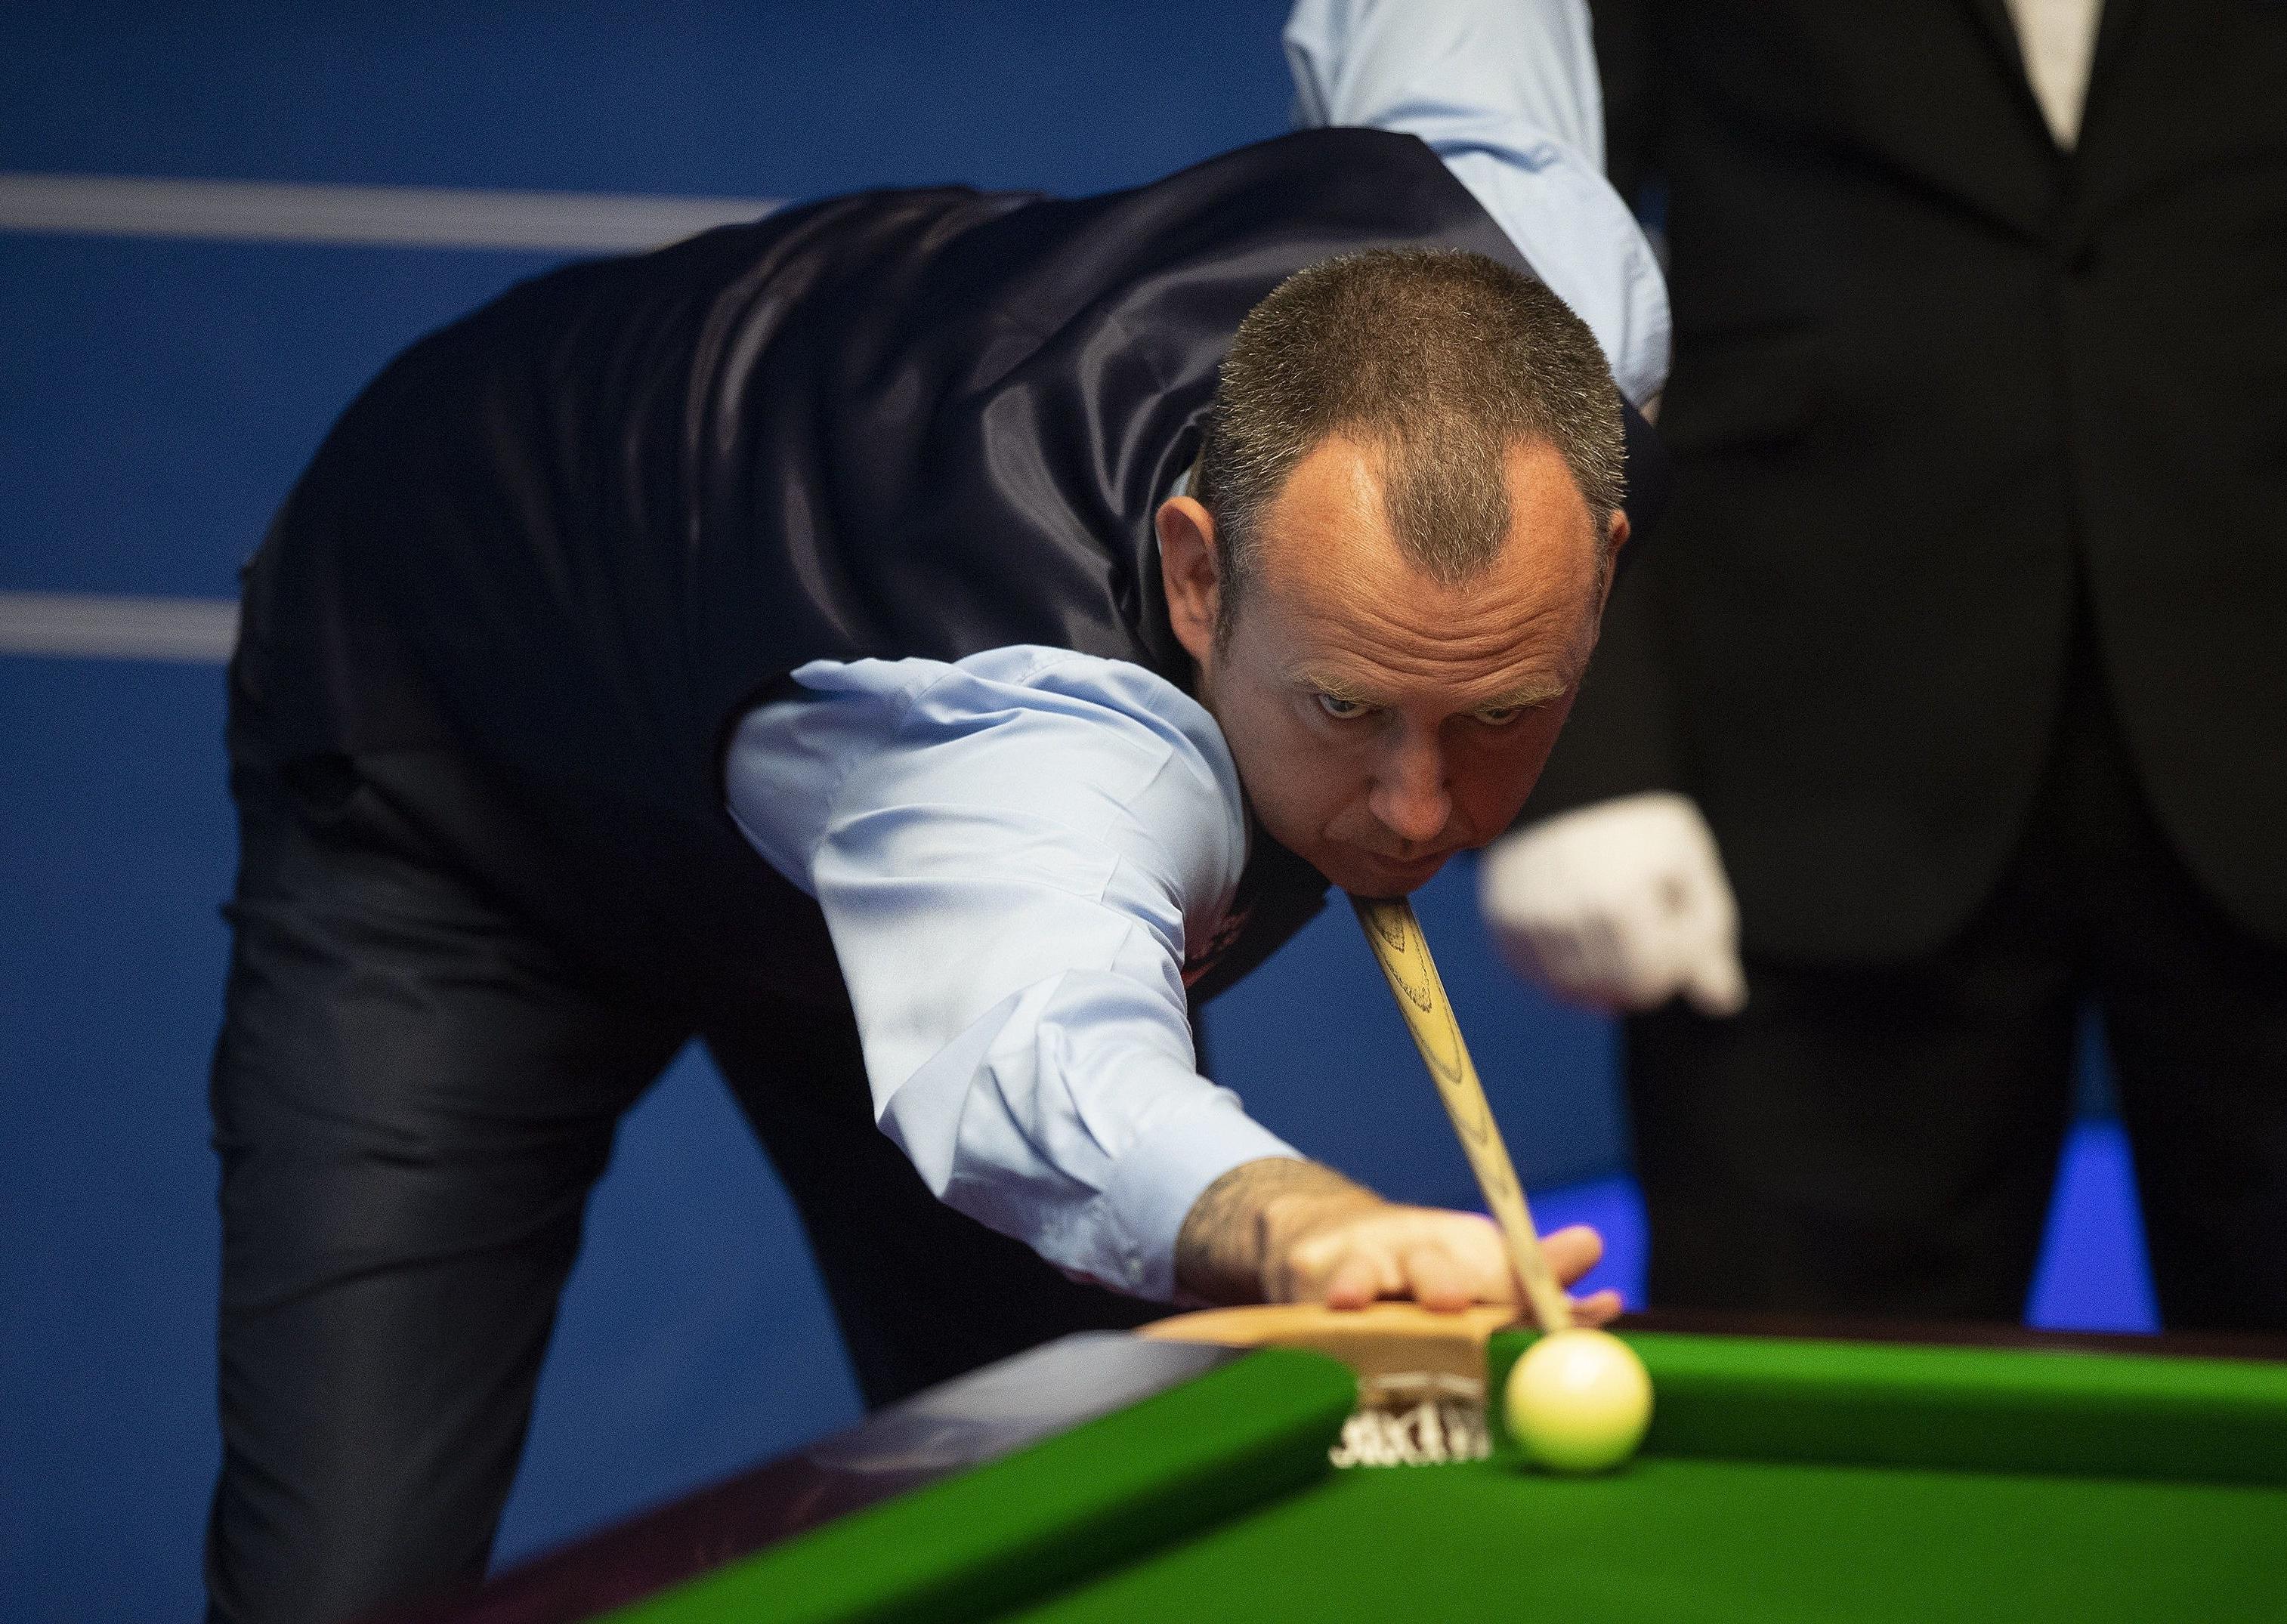 Mark Williams playing safe over World Championship chances